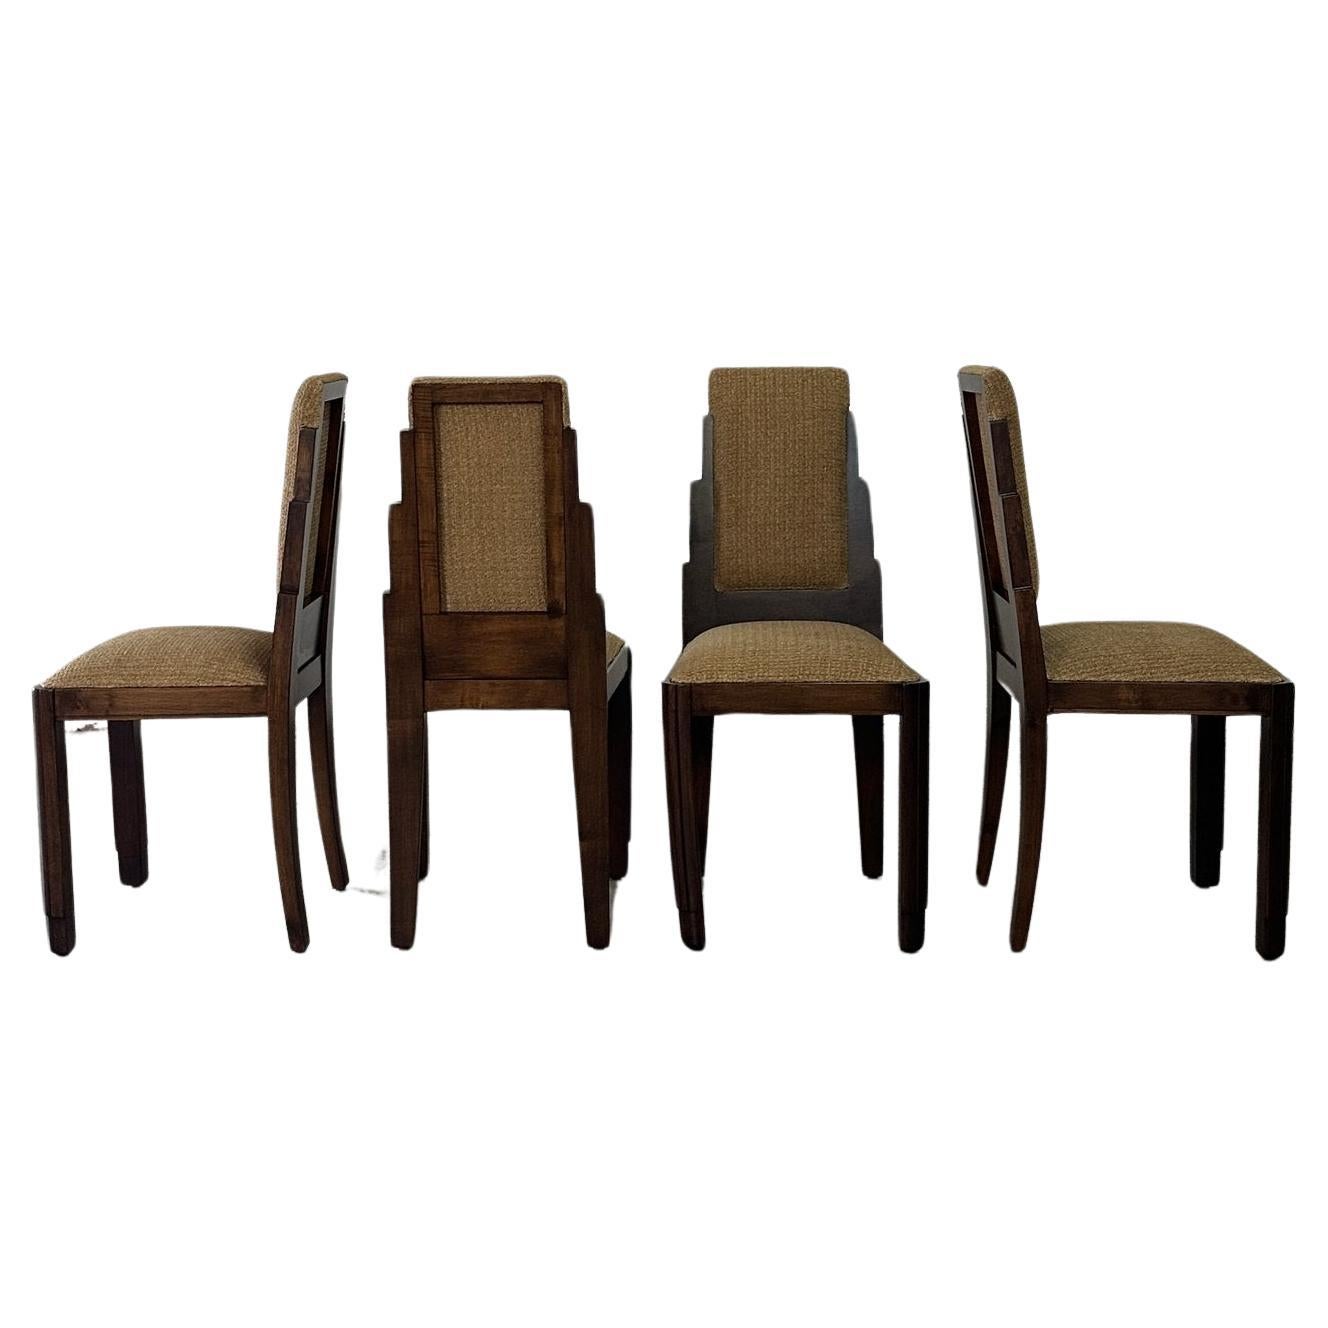 Art deco dining chairs - set of four